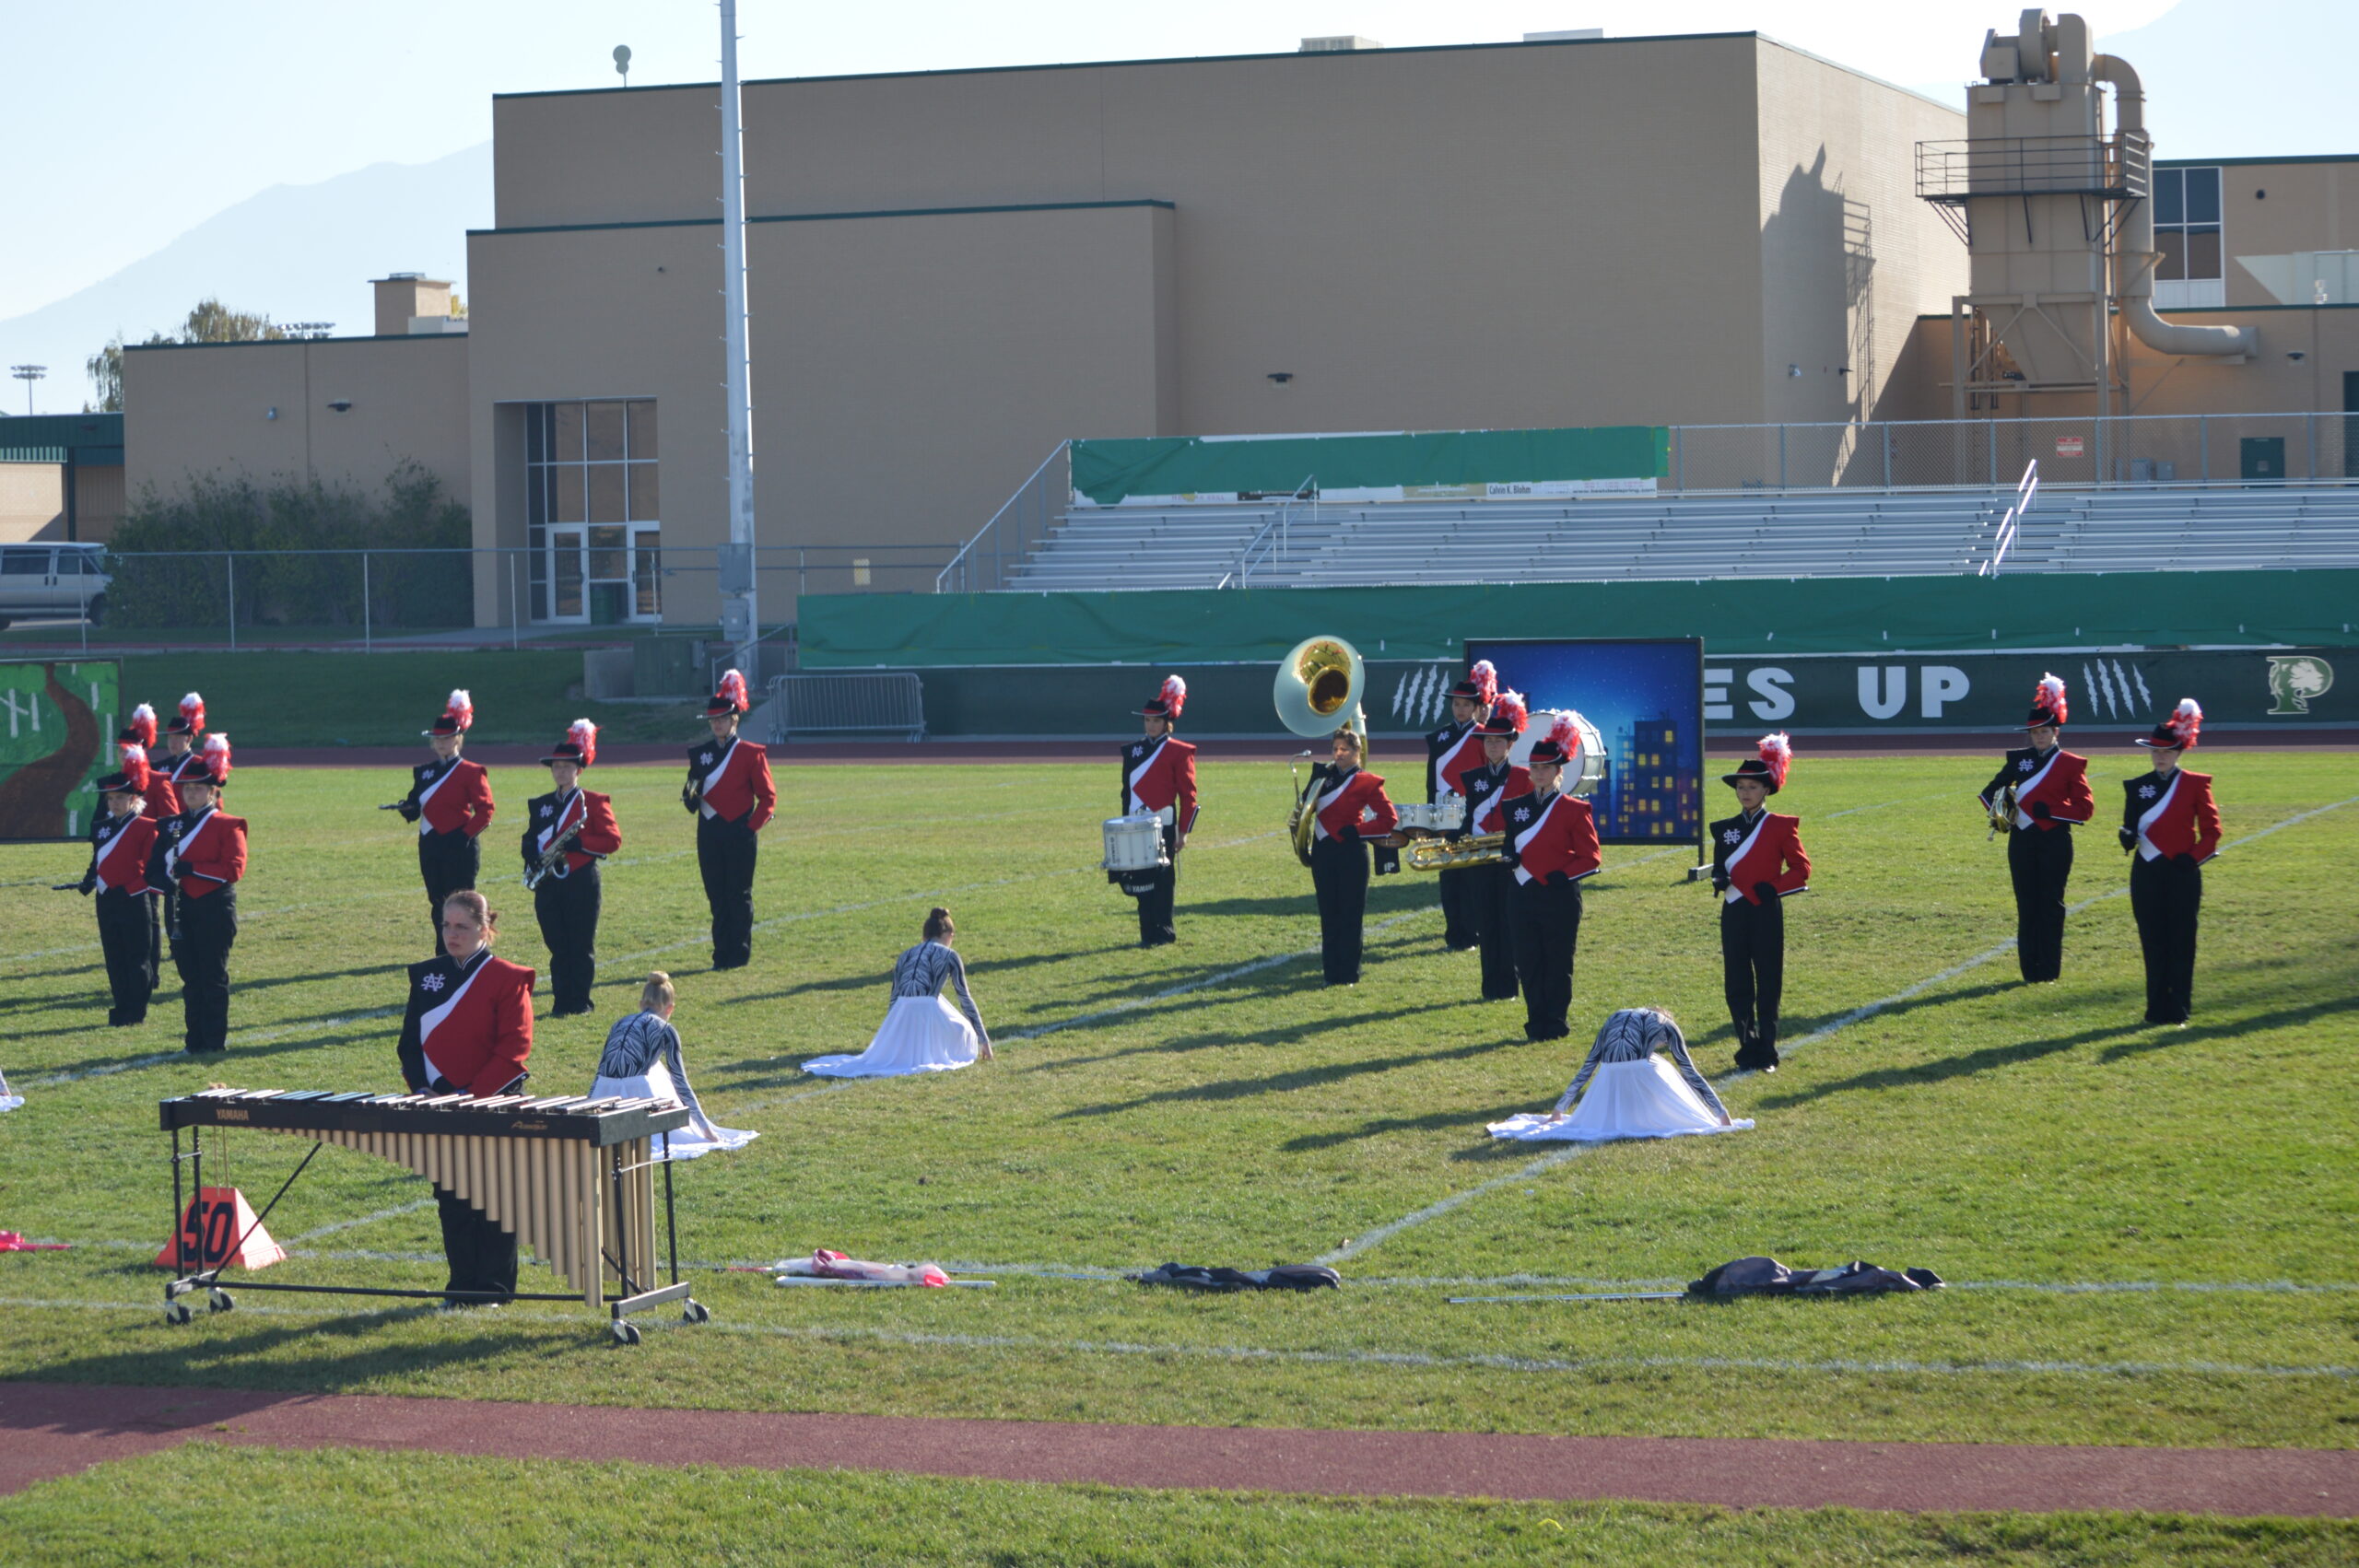 Marching band program ends due to lack of student interest